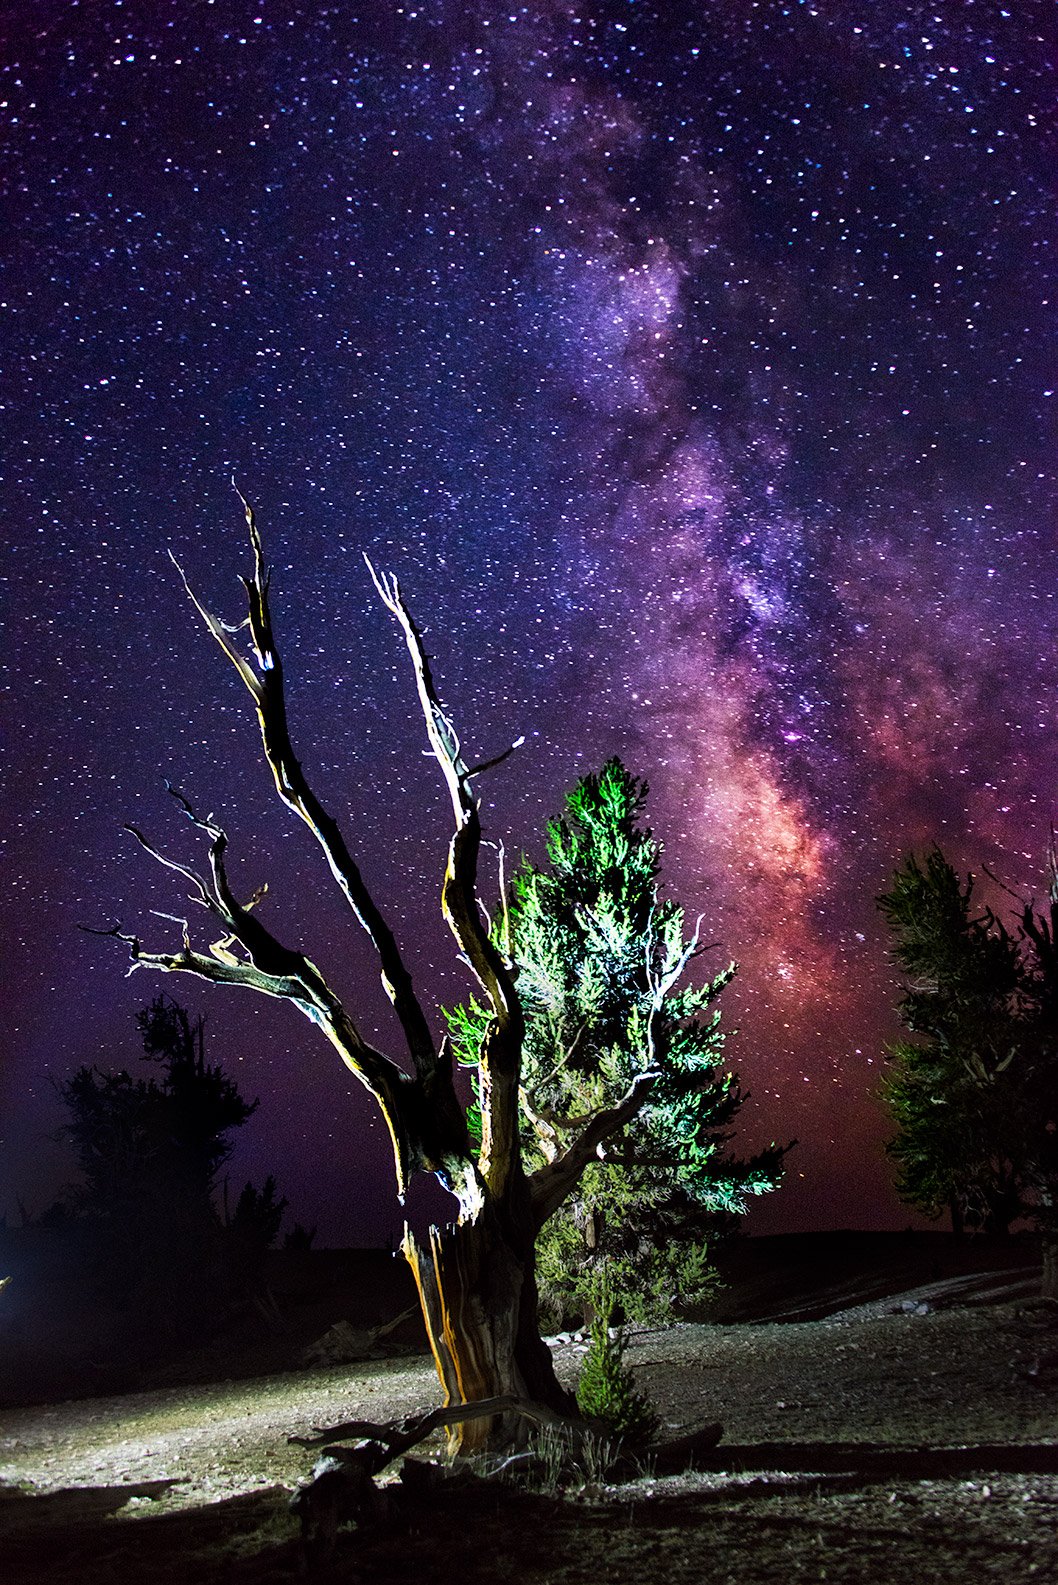 The White Mountains sit above 11,000 ft. making the Milky Way visible at night.